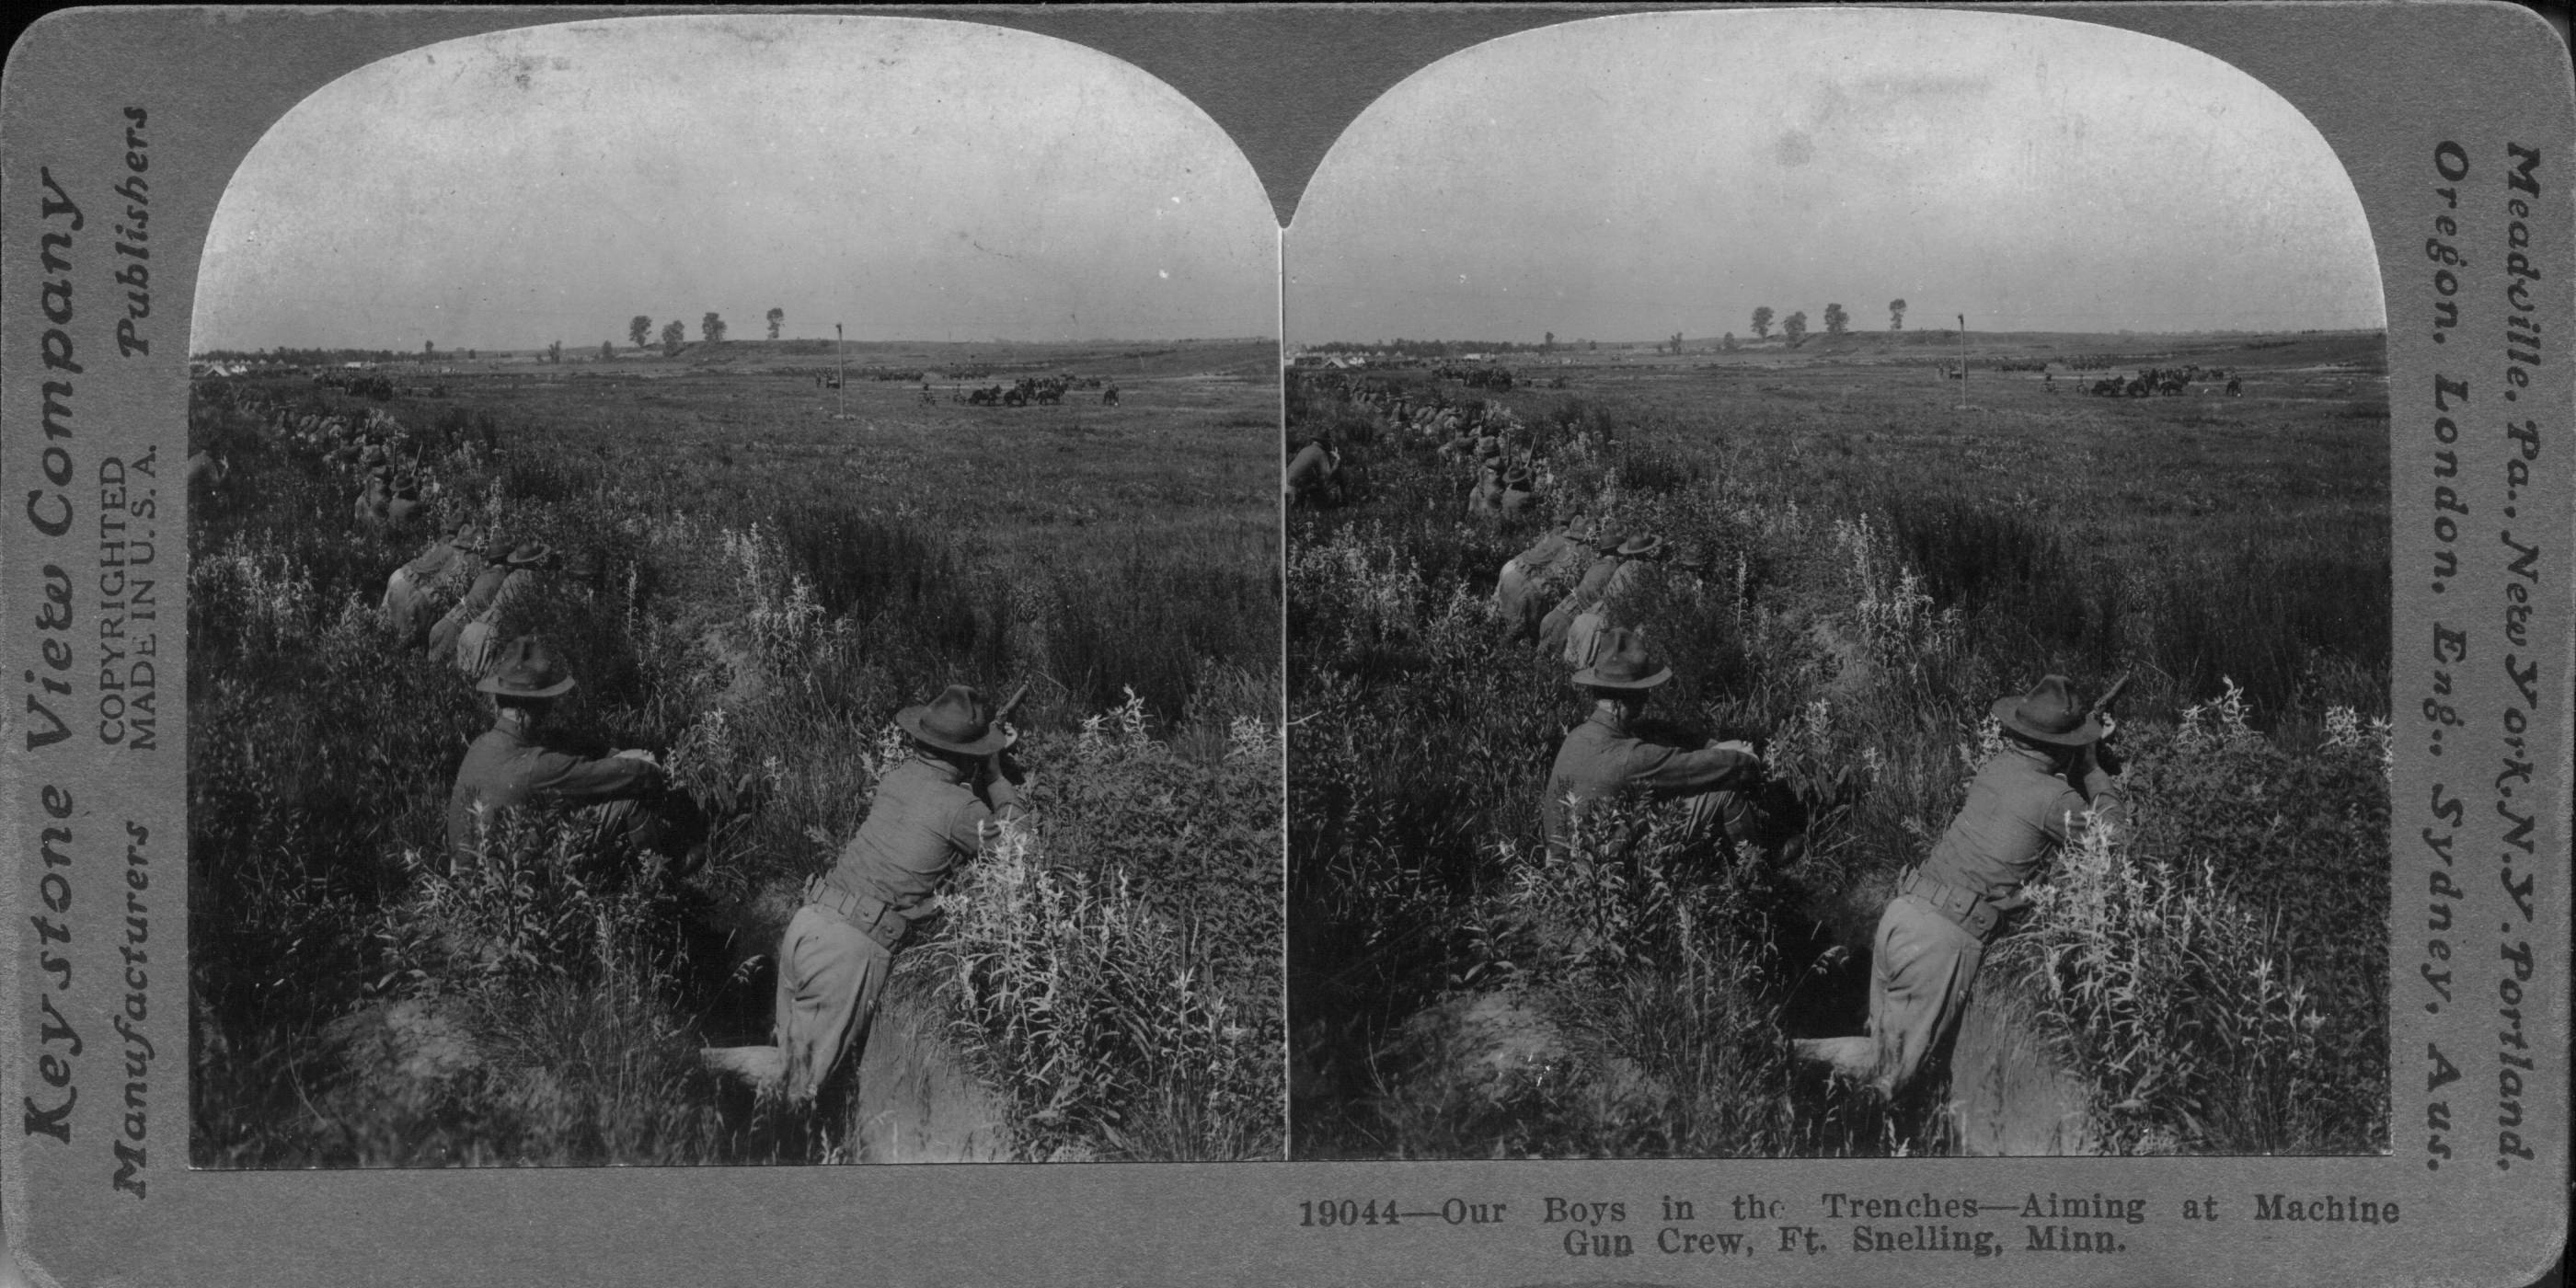 Our Boys in the Trenches - Aiming at Machine Gun Crew, Ft. Snelling, Minnesota